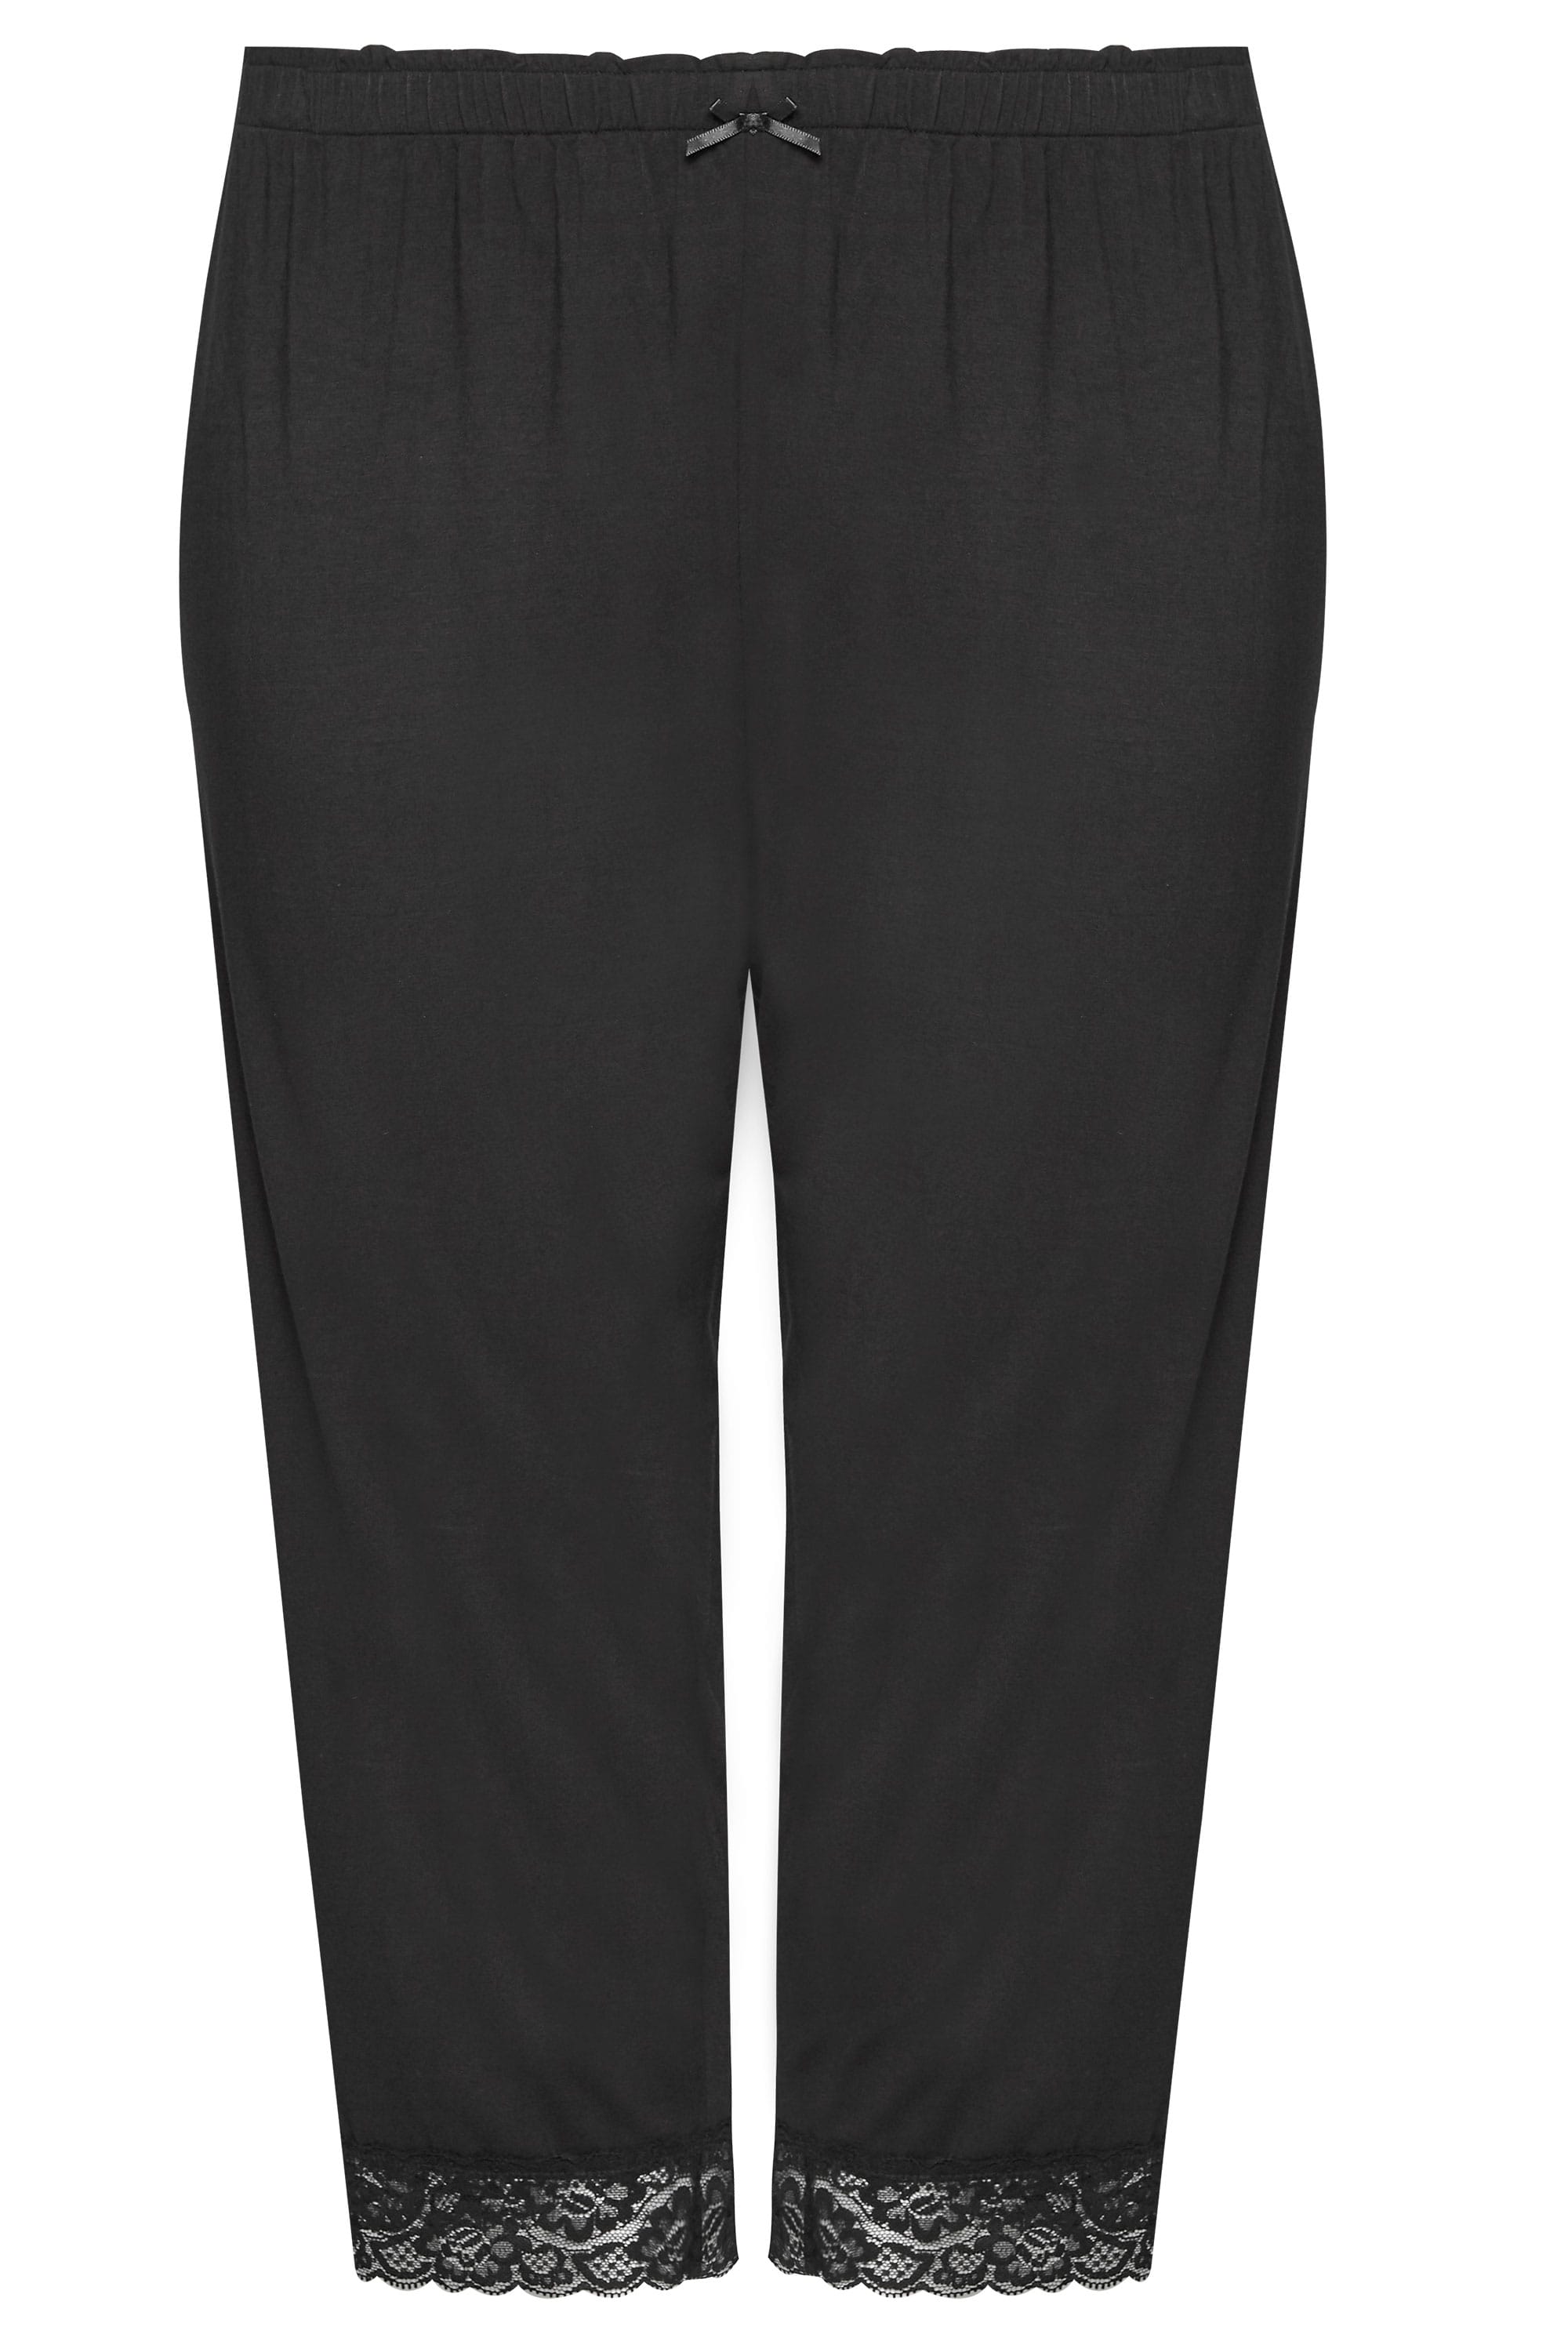 Black Cropped Pyjama Bottoms With Lace Trim, plus size 16 to 40 | Yours ...